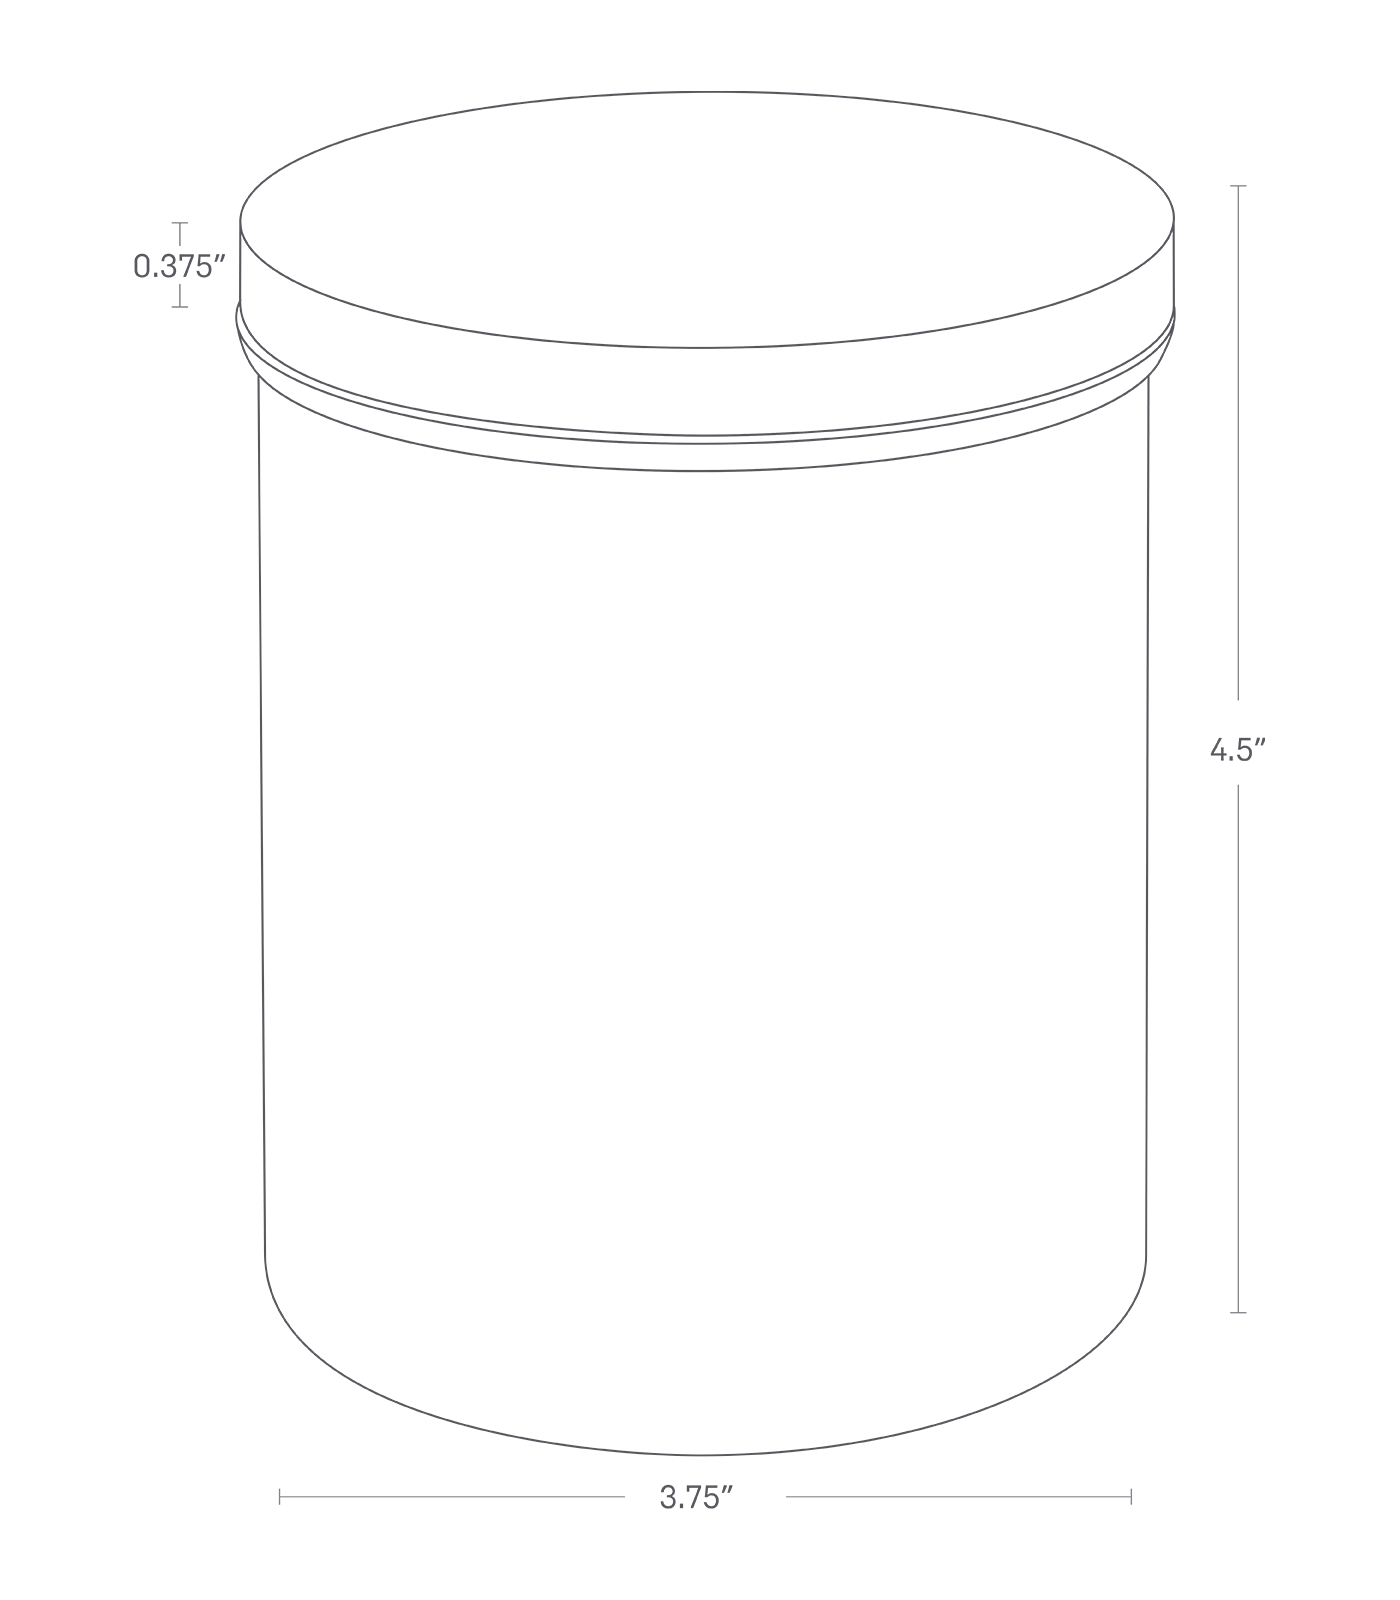 Dimension image for Ceramic Canisters showing cotainer height of 4.5